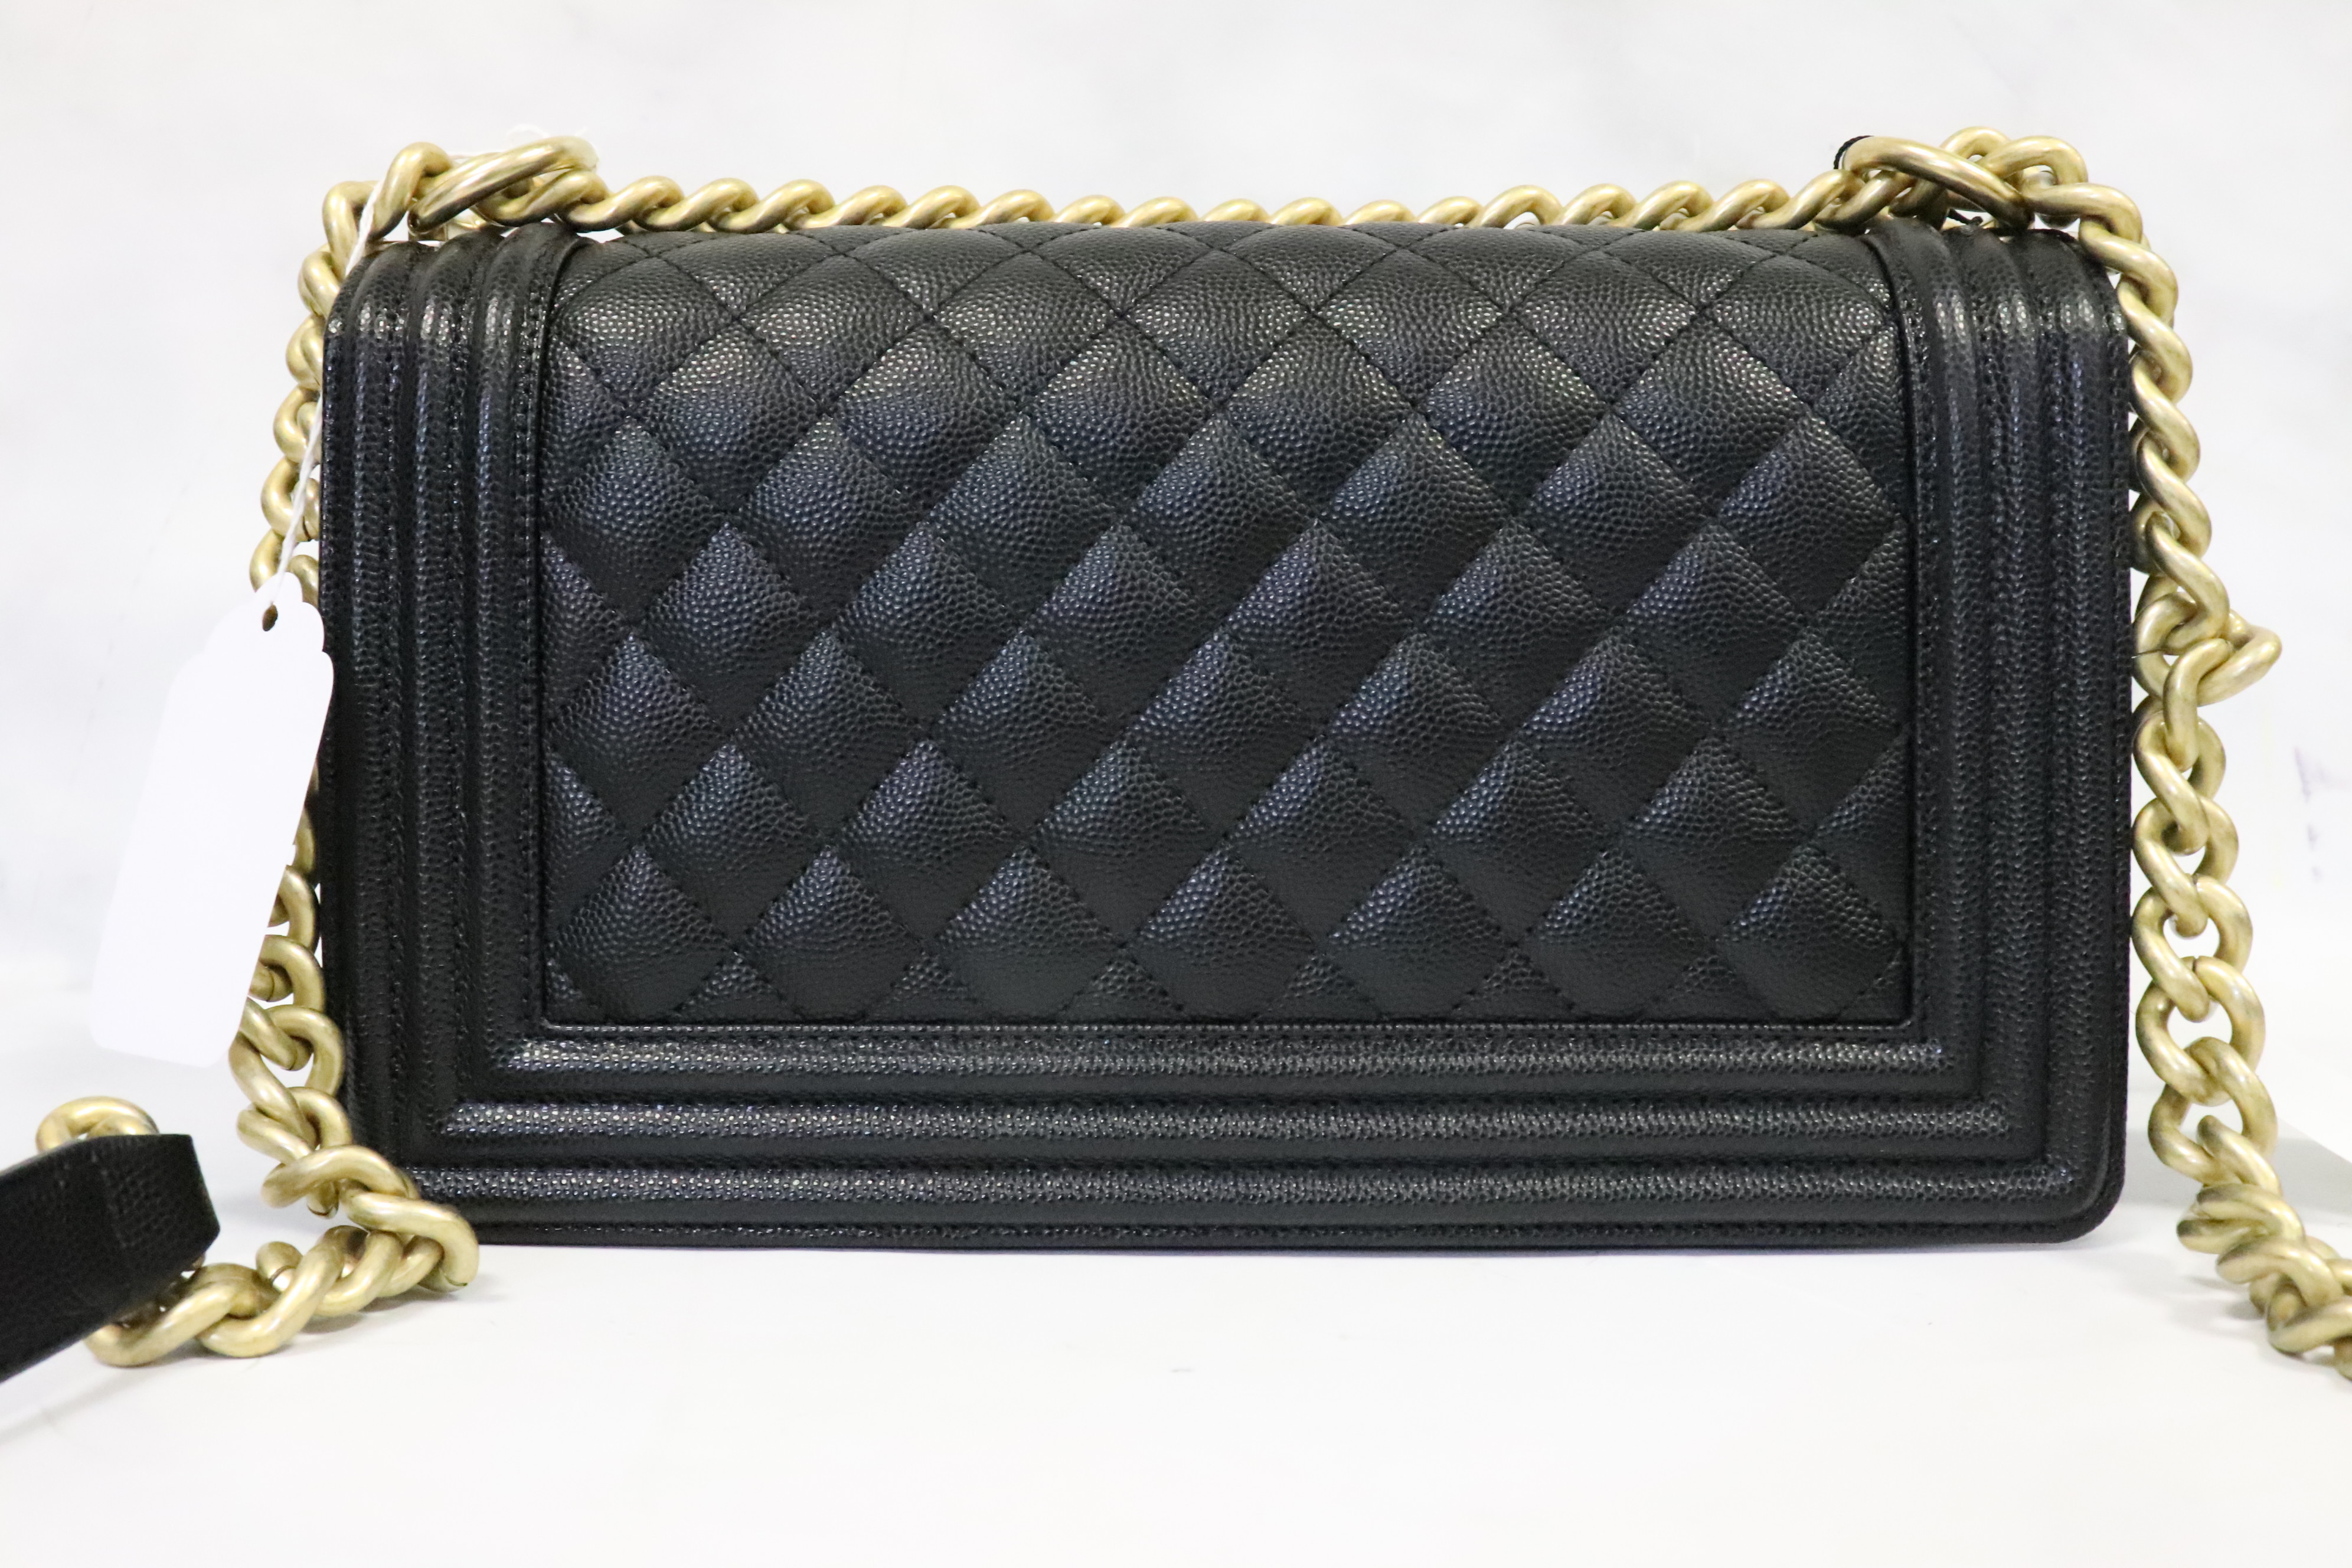 Quilted Caviar Old Medium Boy Black with Gold Hardware – Style Theory SG